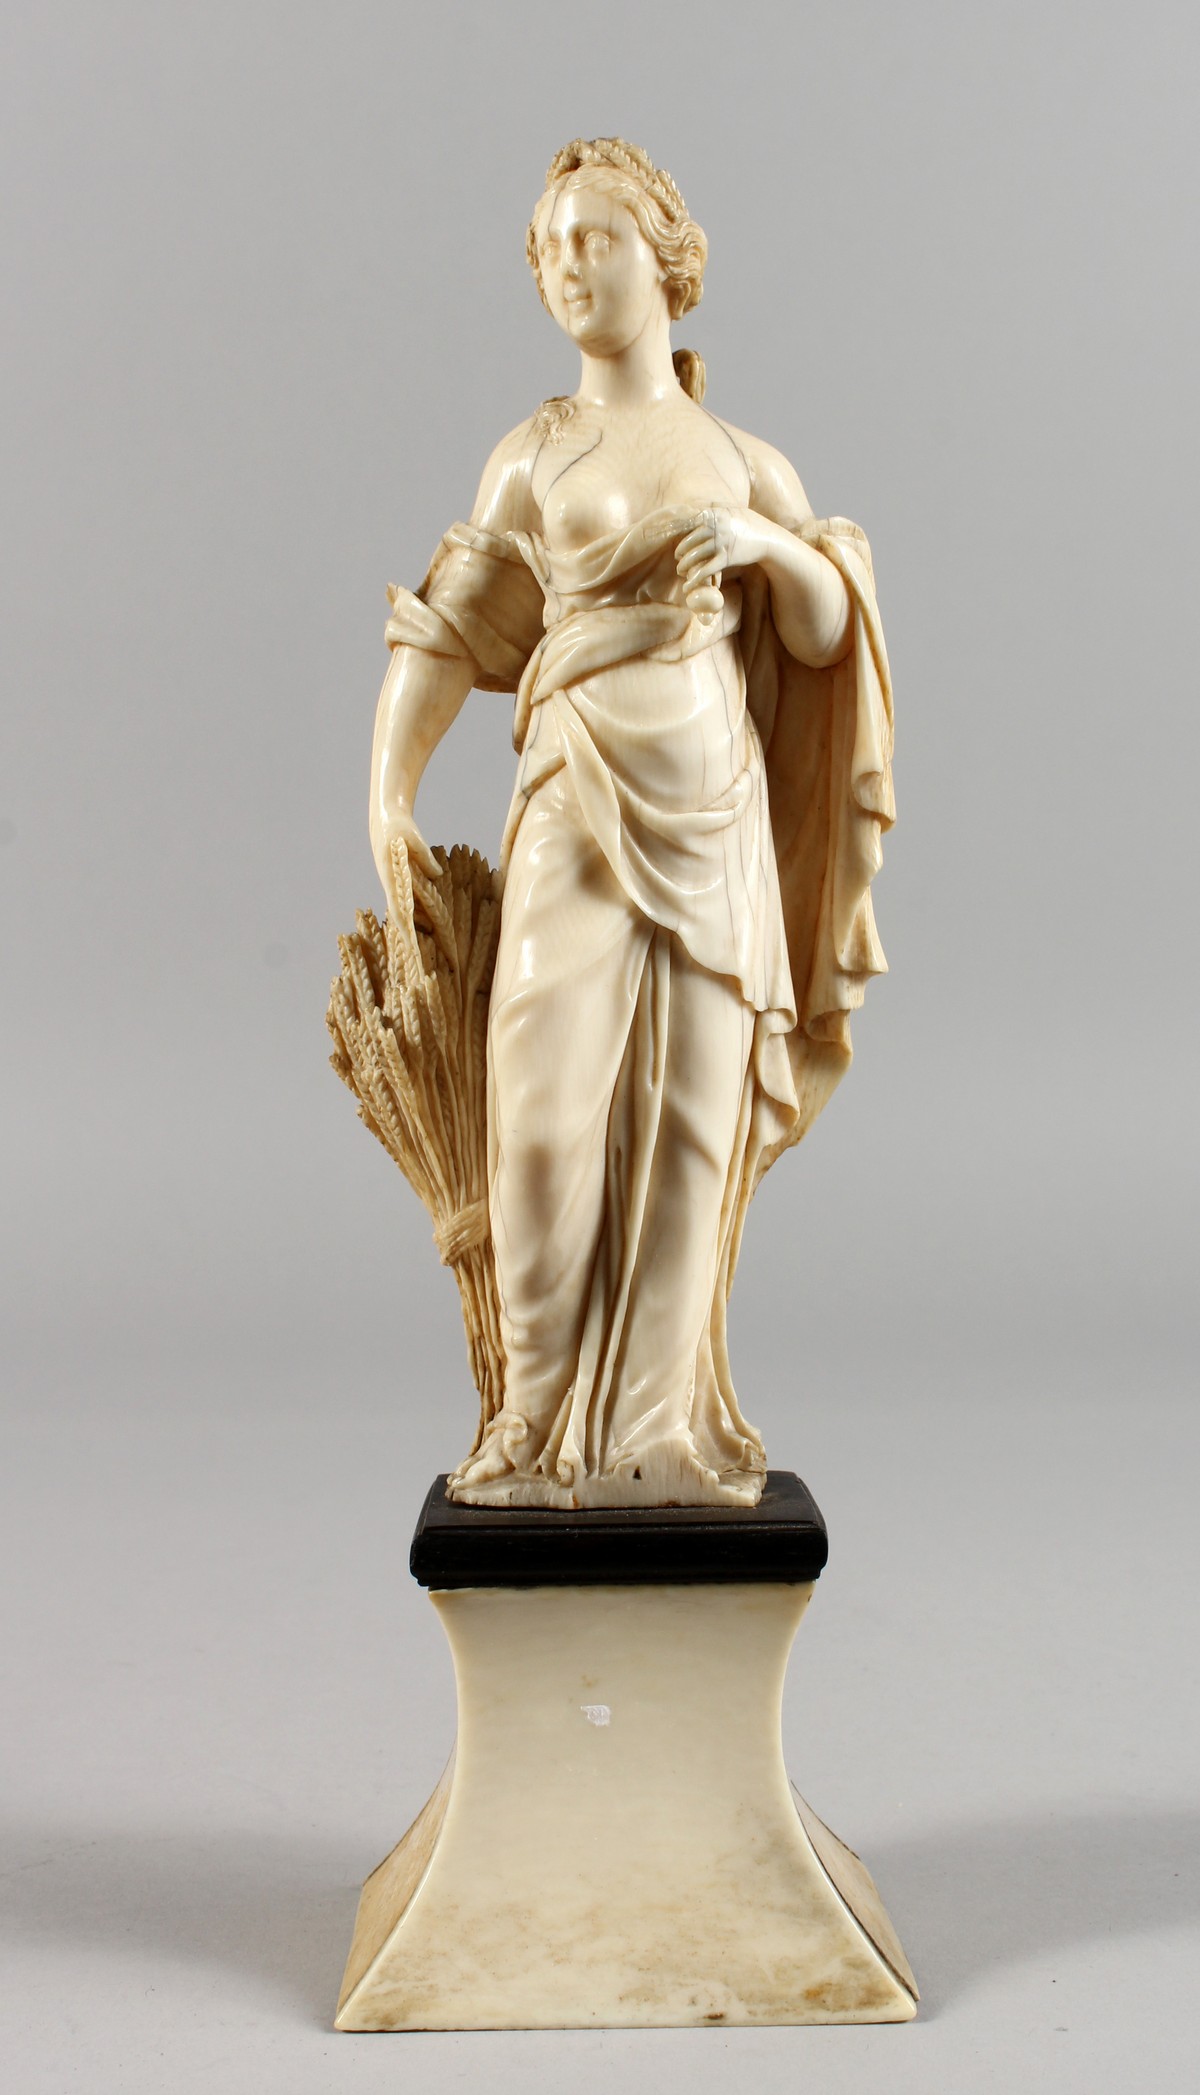 AN 18TH CENTURY CARVED IVORY FIGURE OF A YOUNG FEMALE FIGURE depicting AUTUMN, standing on a plinth. - Image 5 of 5